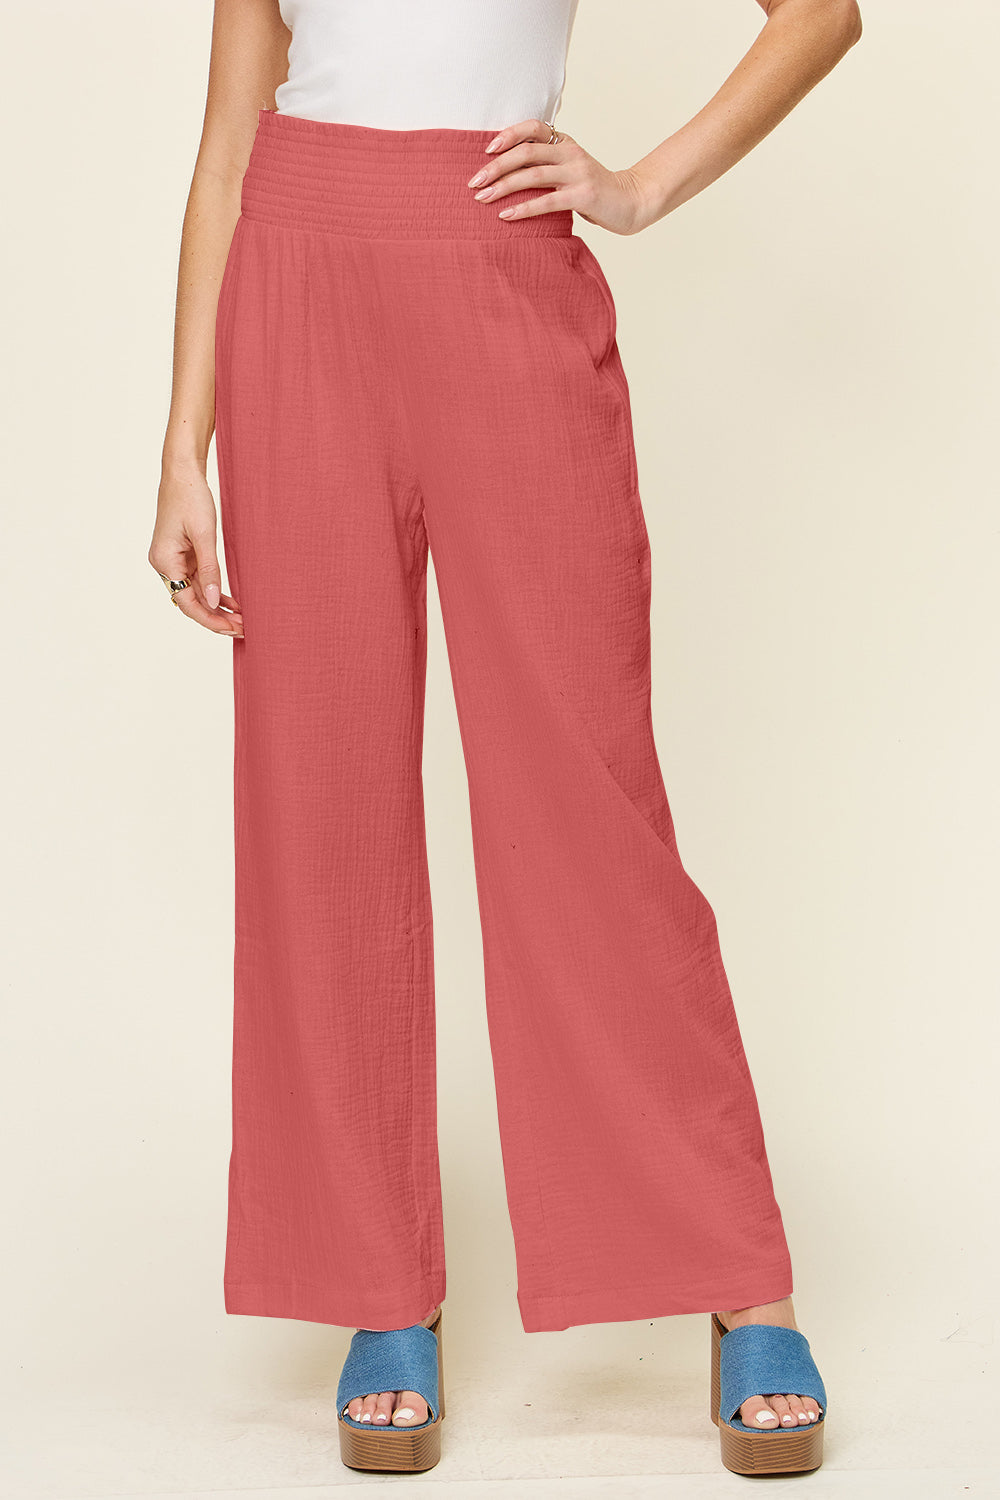 Double Take Full Size Texture Smocked Waist Wide Leg Pants Hot Pink